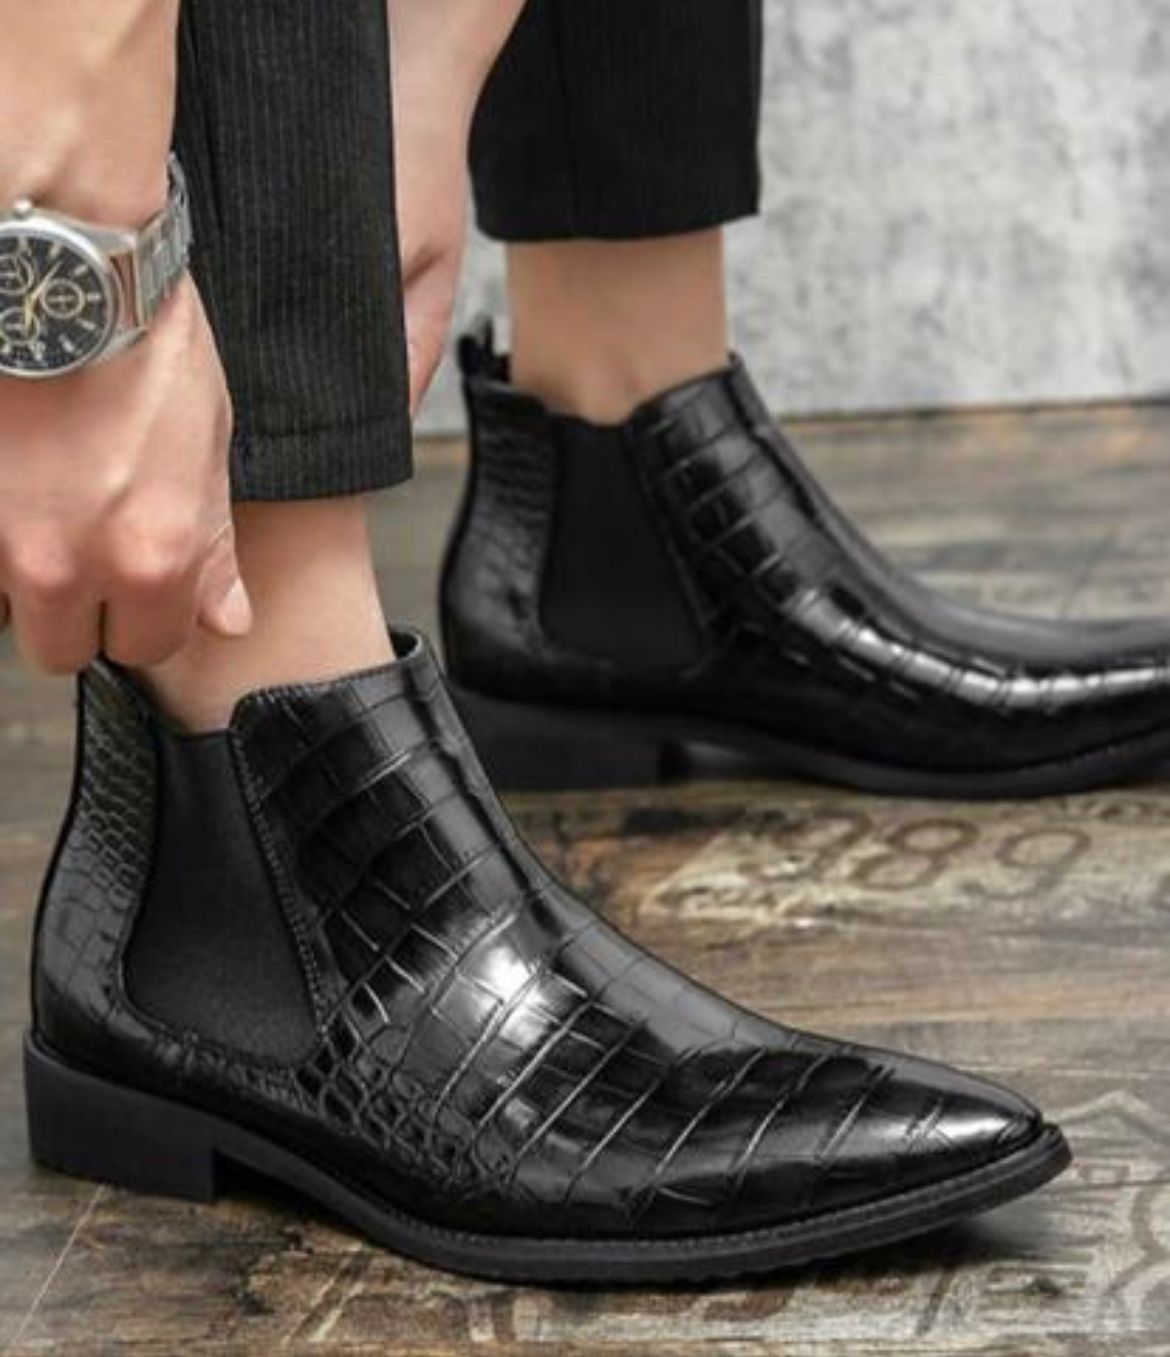 New Stylish Croco Boots For Men Party and Formal Wear -Jack Marc